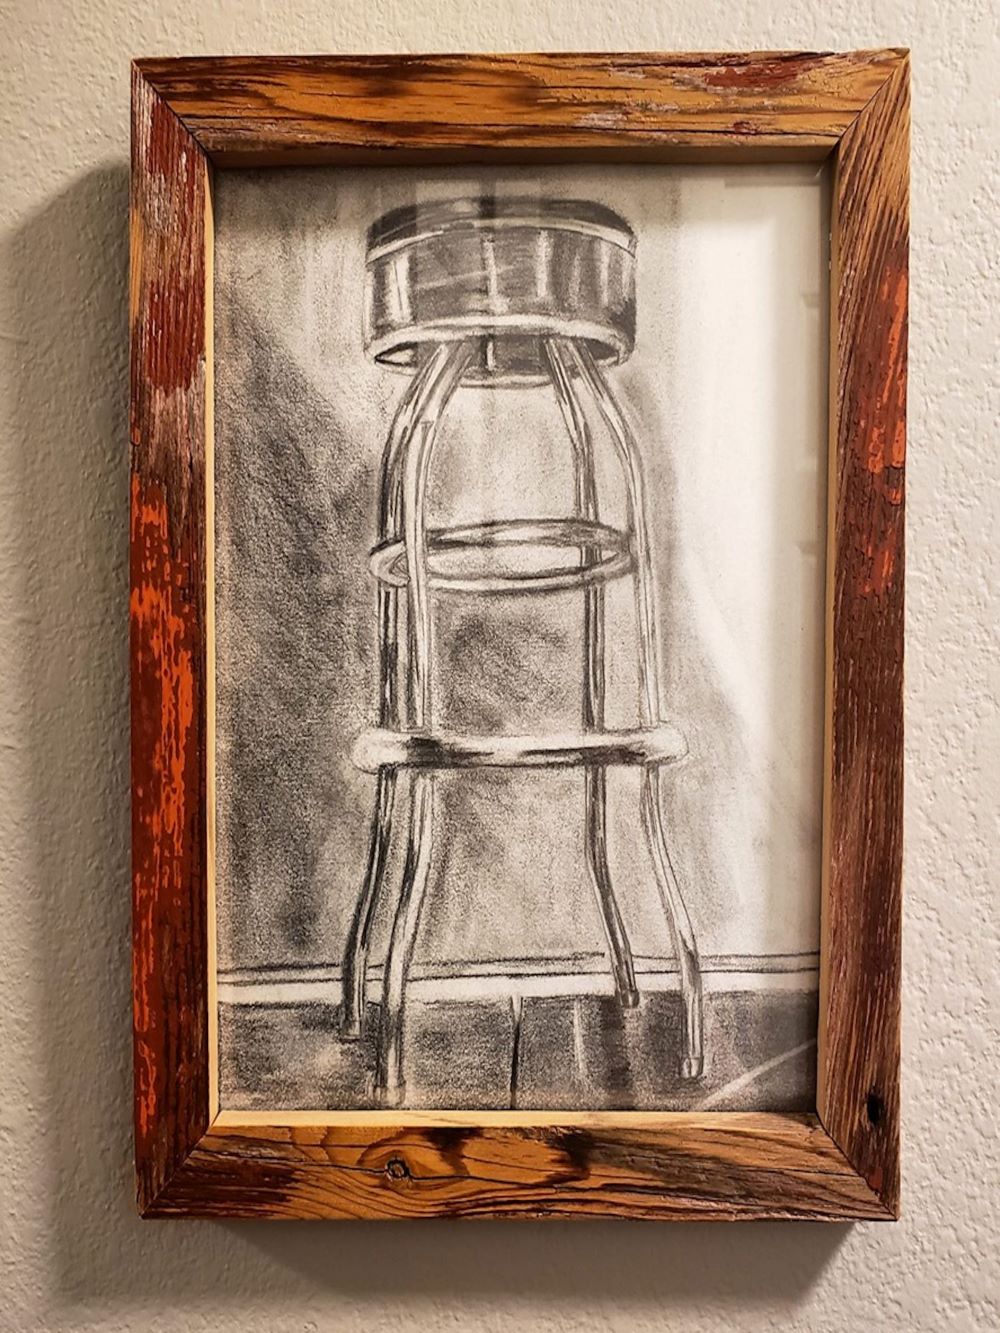 The drawing of a stool in a custom made barnwood frame